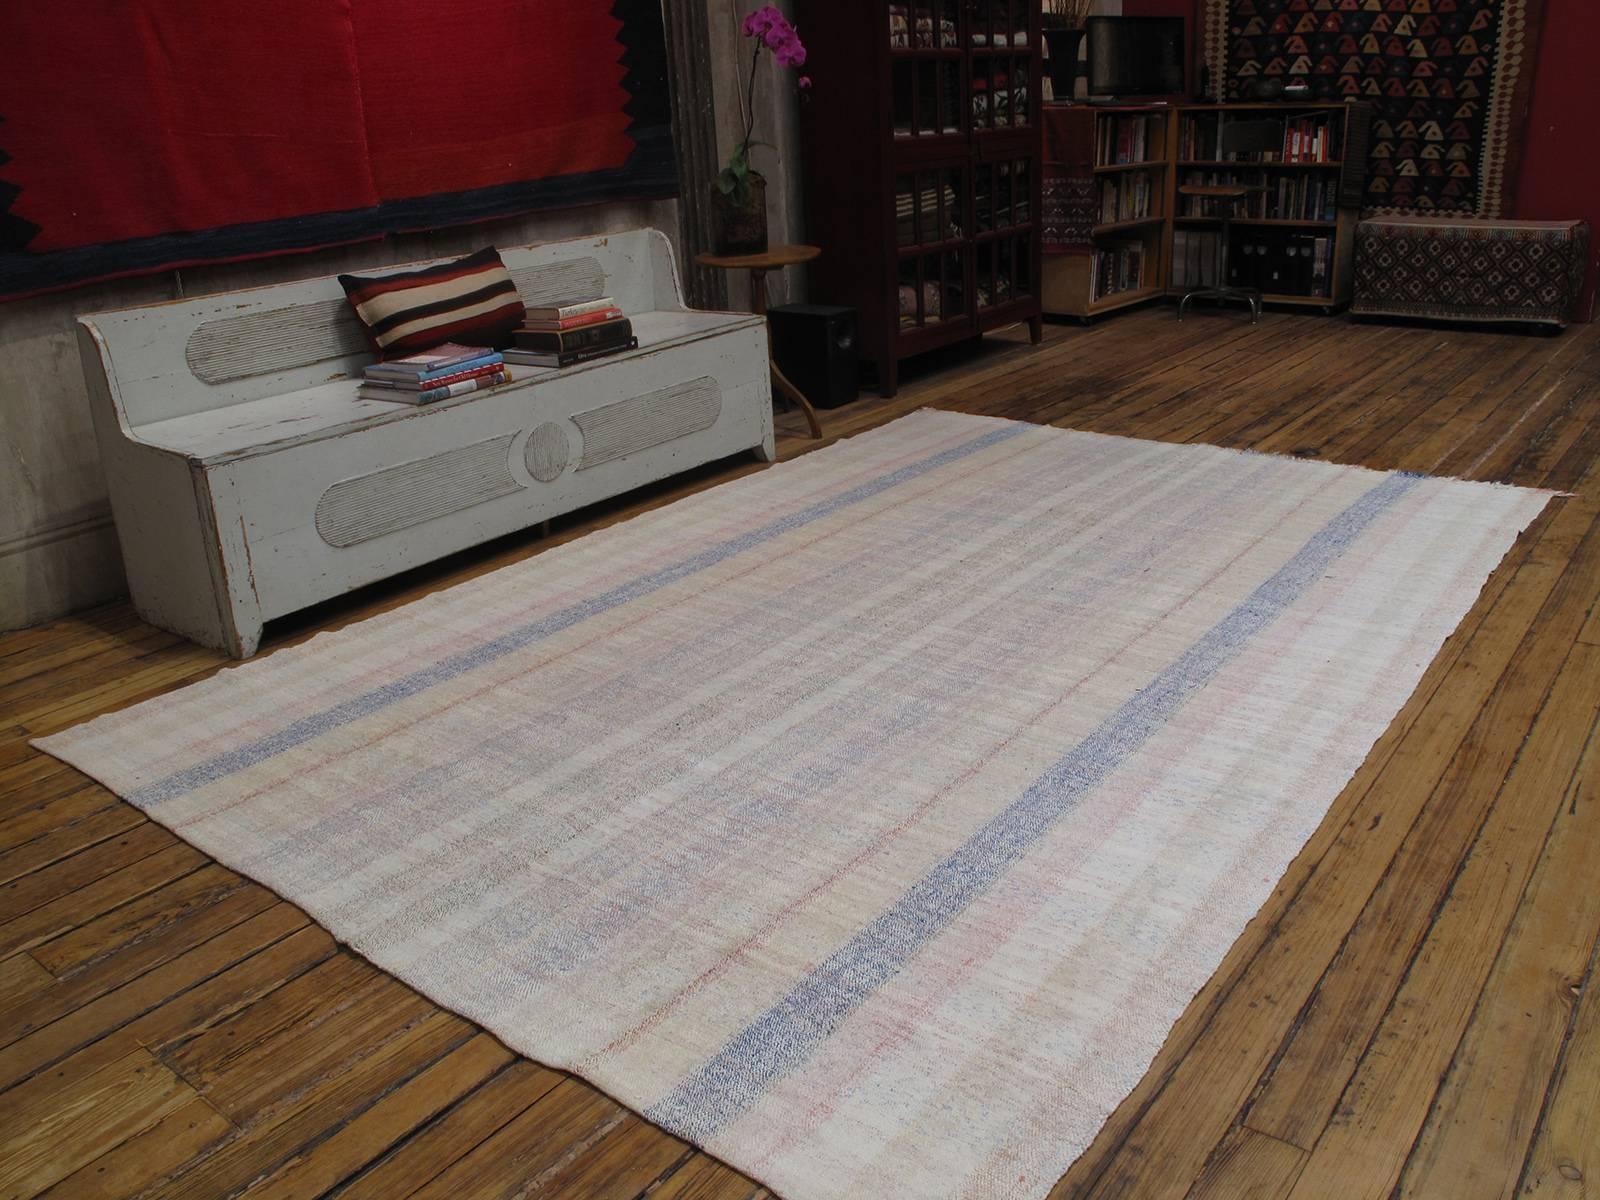 A simple old floor cover from Turkey, woven with an interesting mixture of cotton yarn and colorful cotton rag. Unusually light color palette and large useful size.